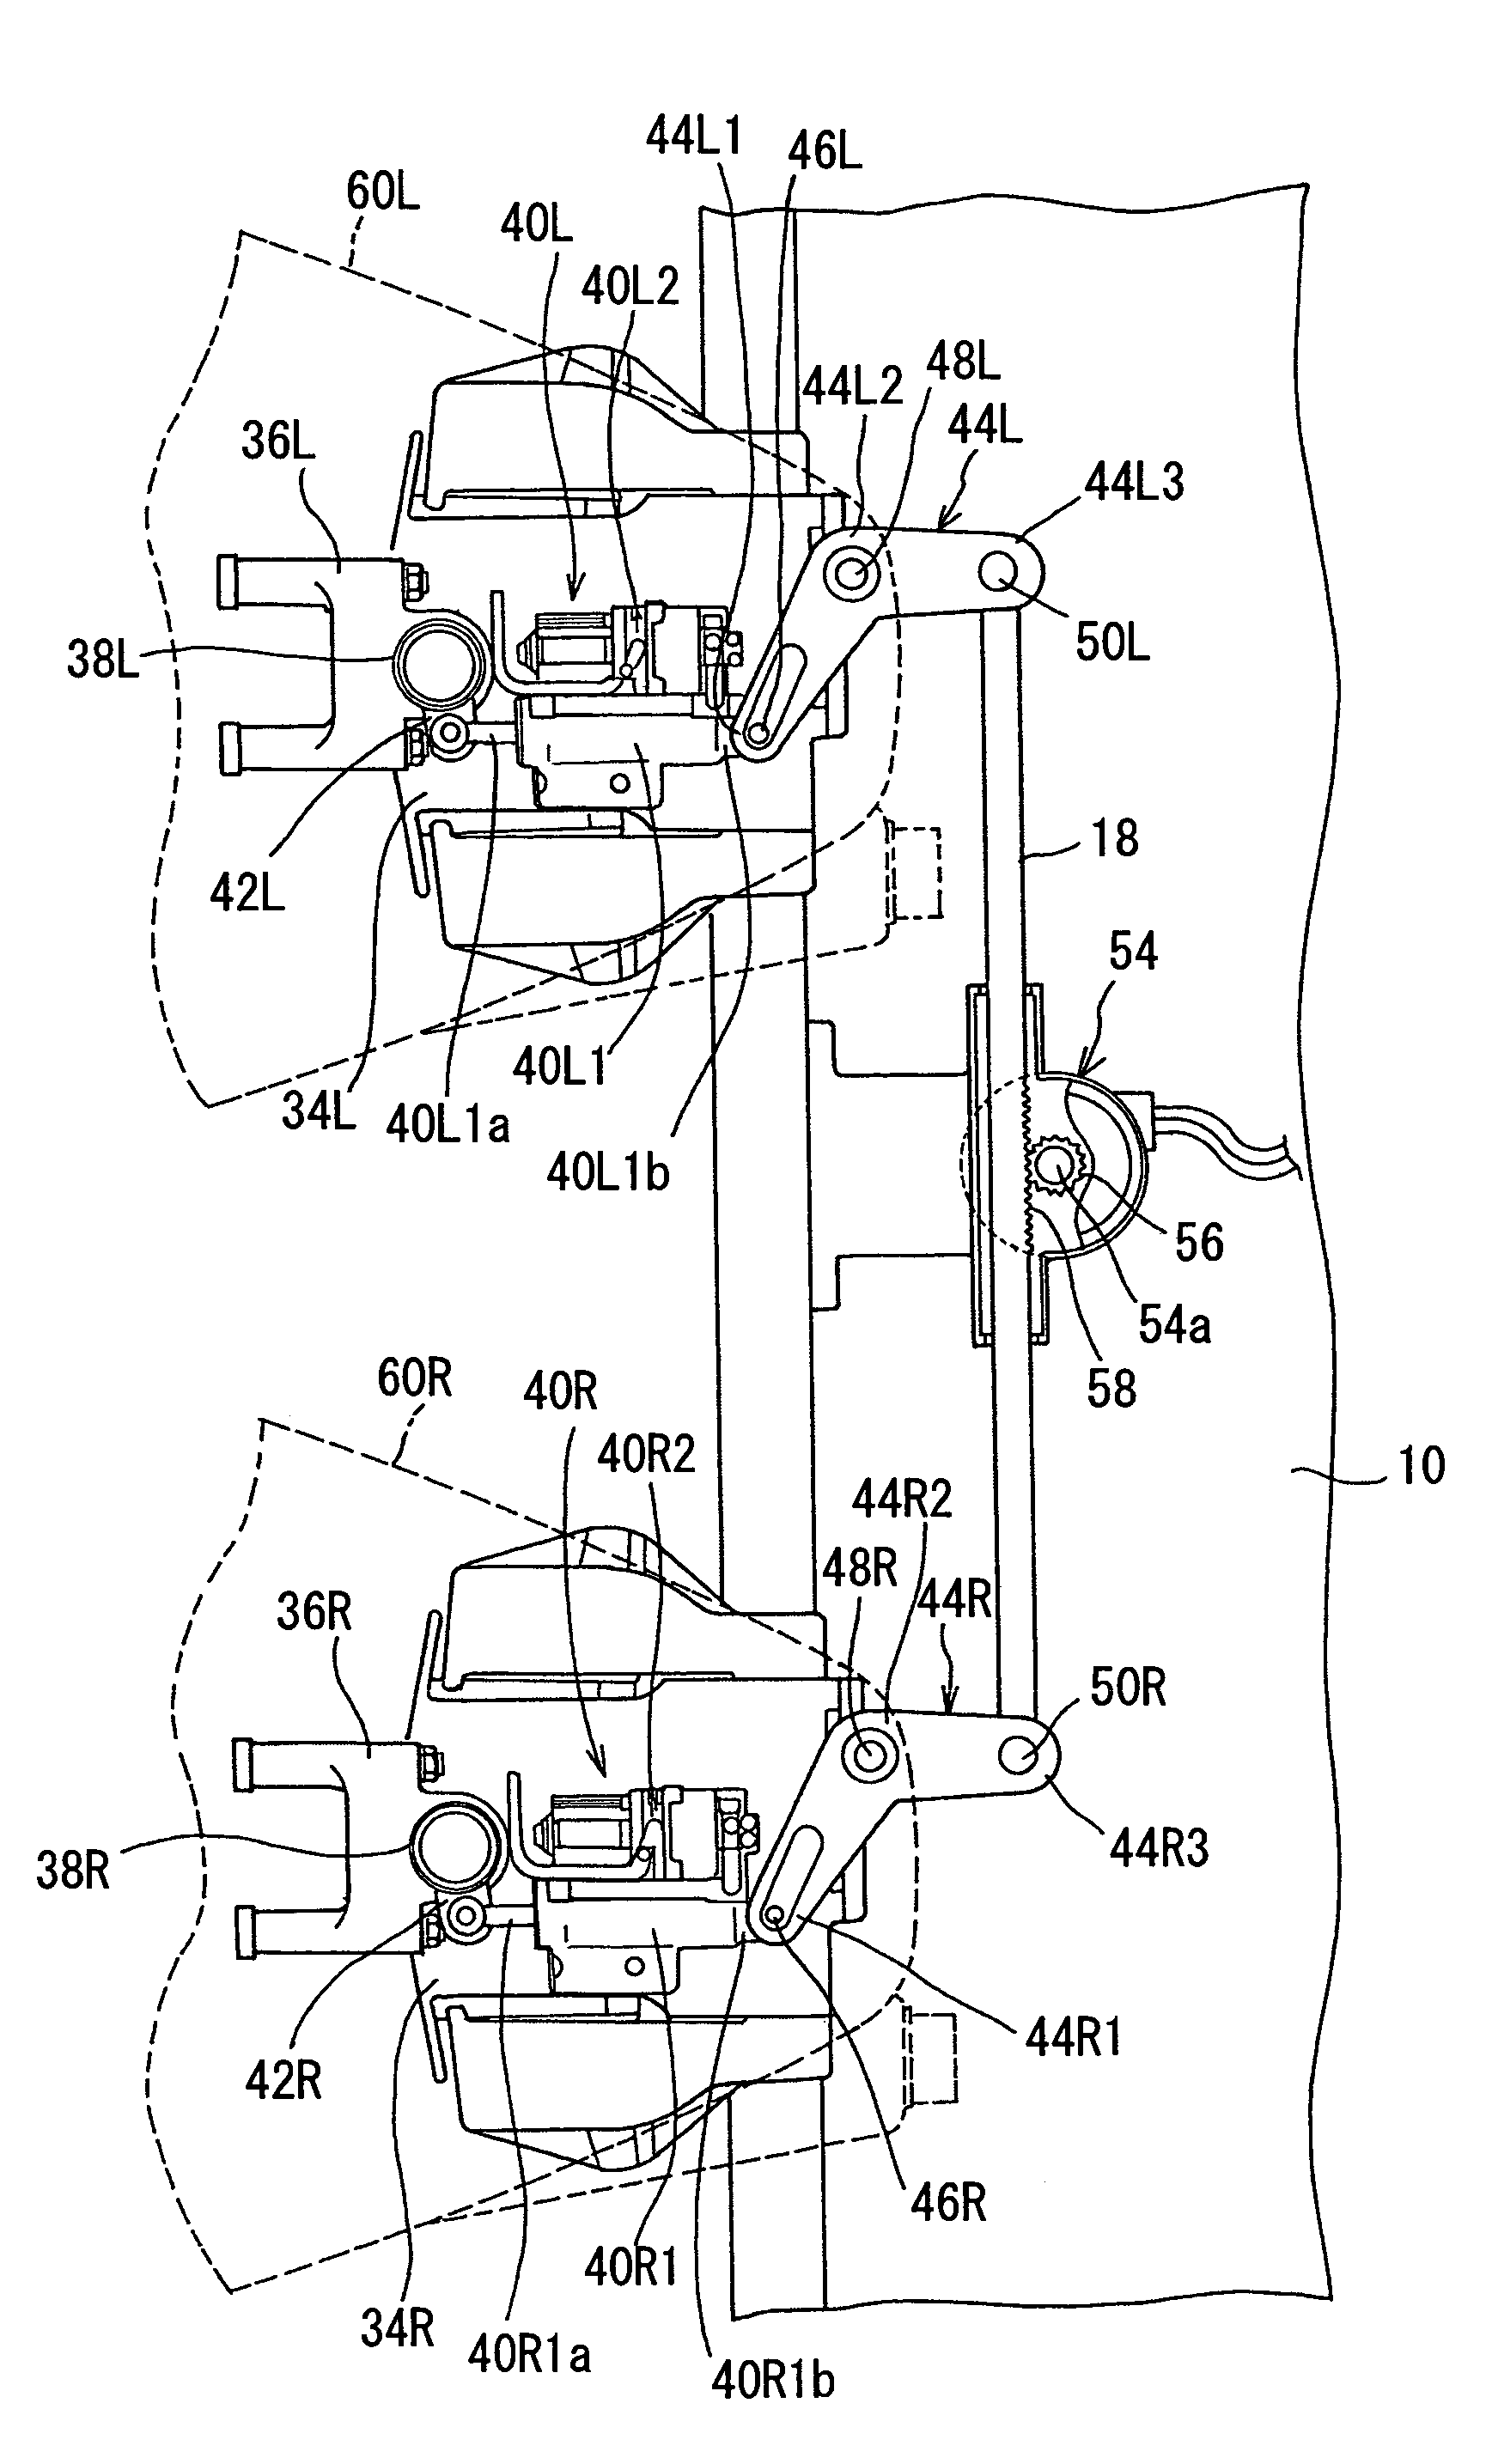 Outboard motor steering control system